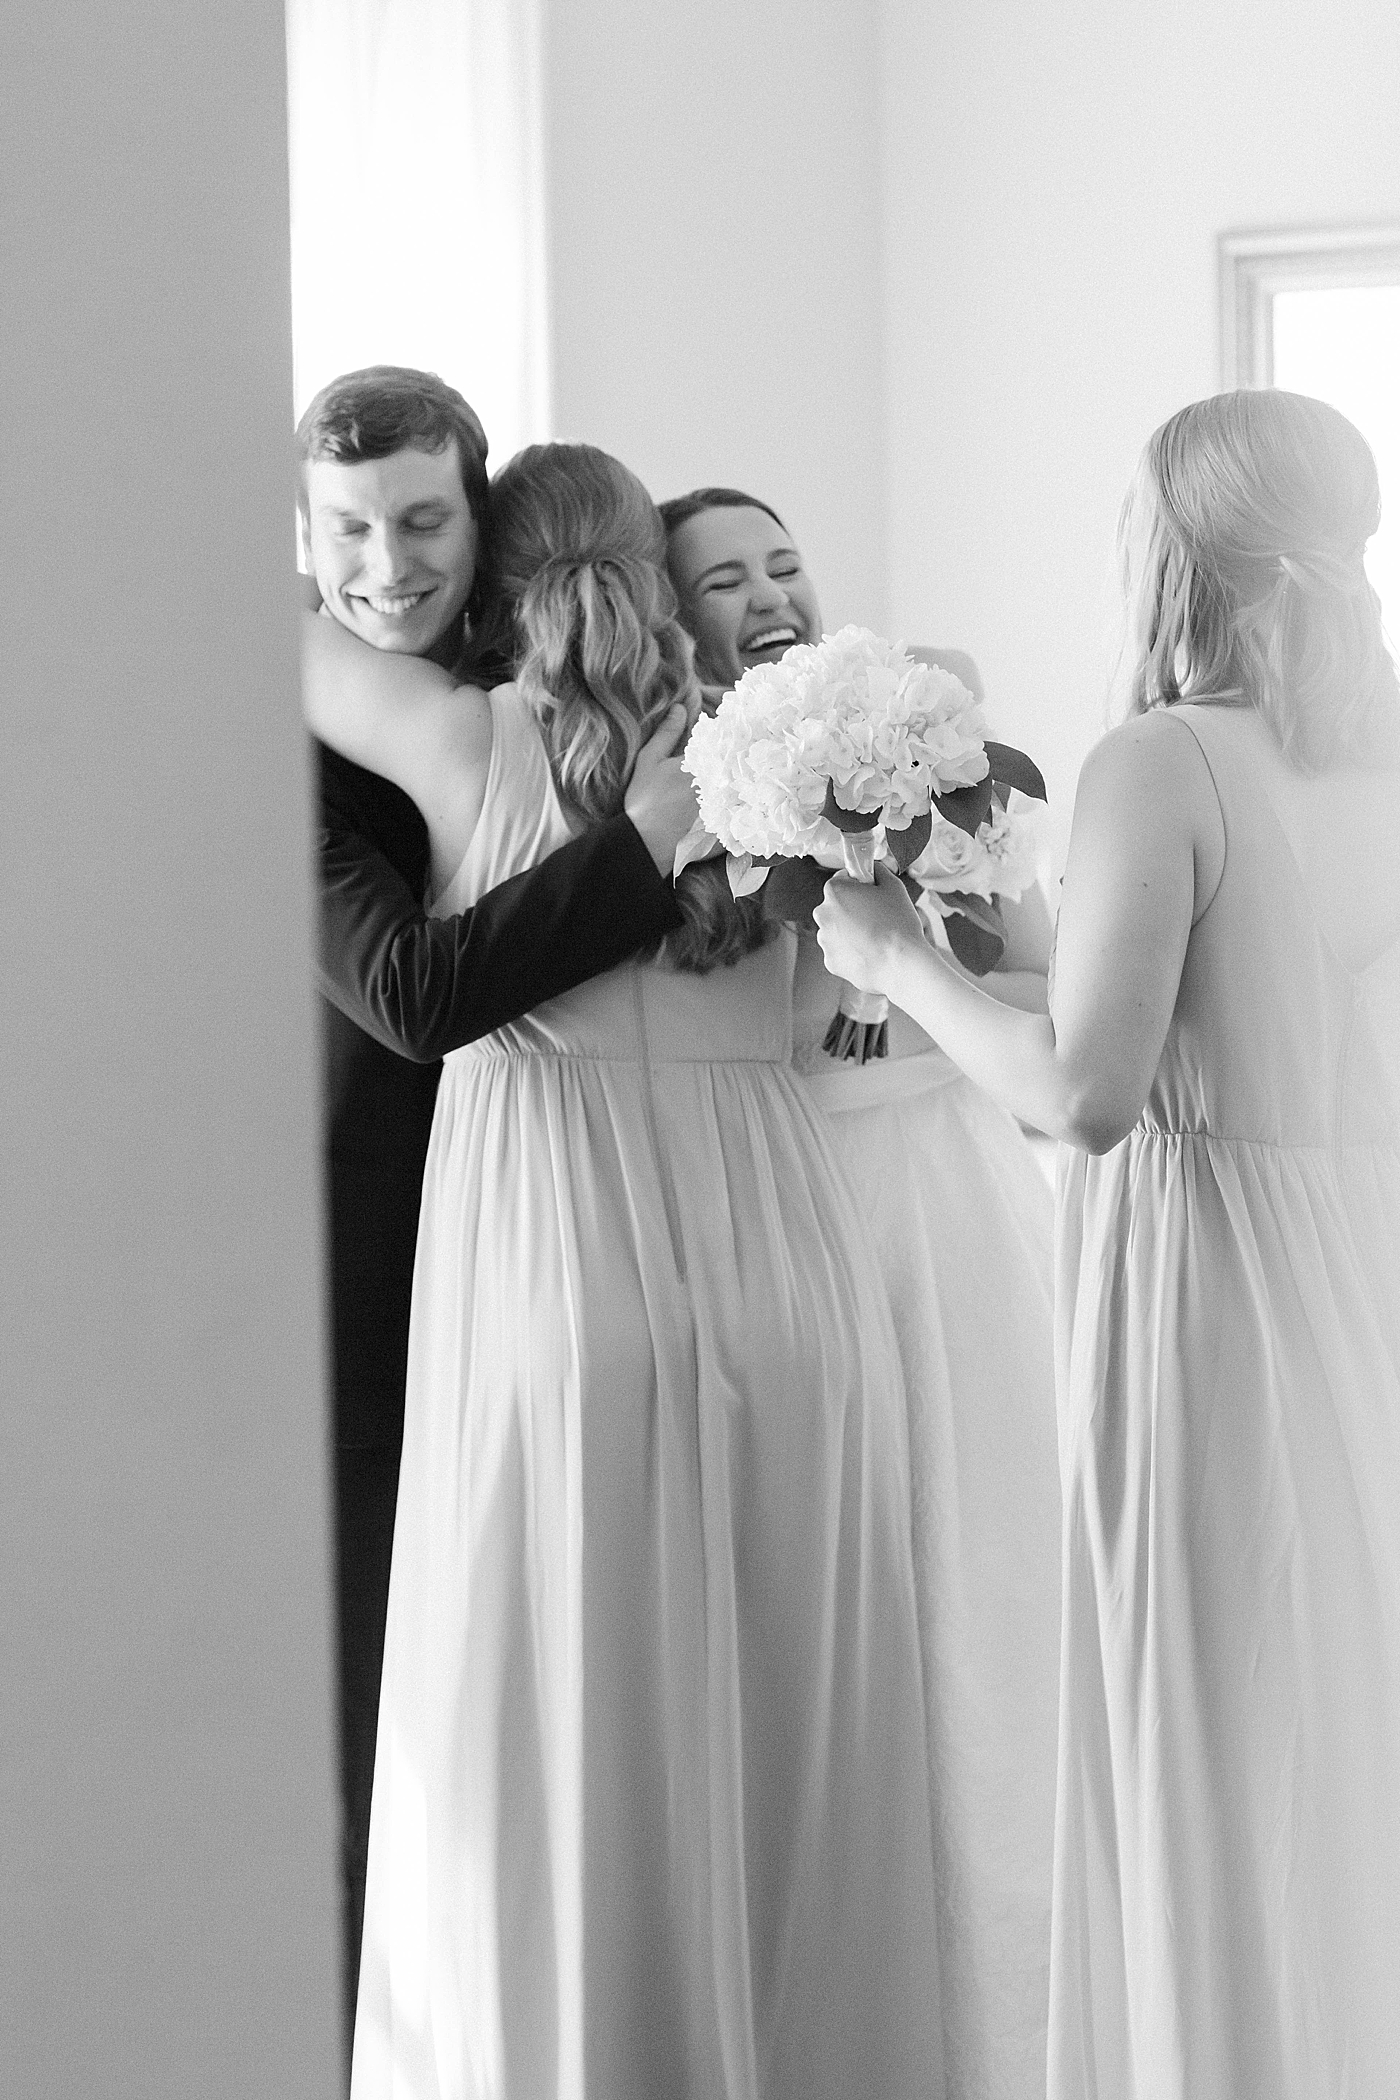 Black and white image of bridesmaid embracing bride and groom during their Intimate spring wedding | Carters Event Co